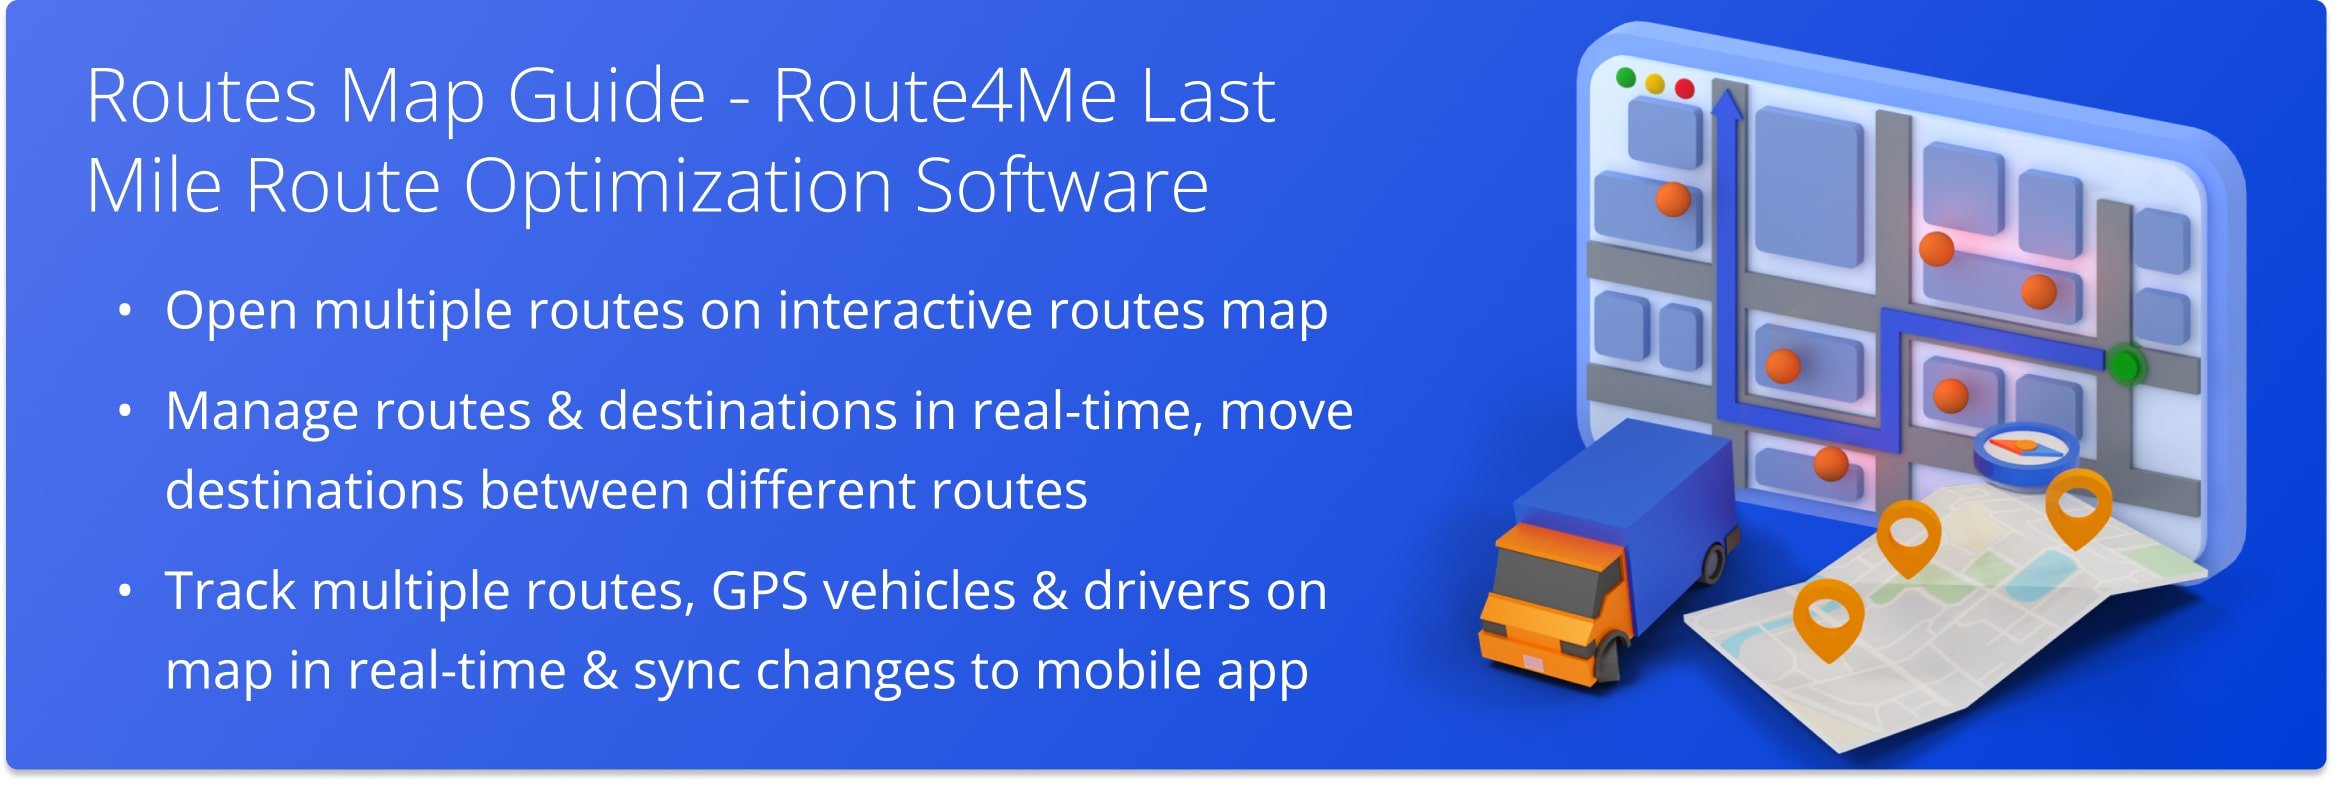 Use Route4Me interactive and customizable Routes Map to open multiple routes, manage routes and destinations, move destinations between routes on the Time Line, track multiple drivers, and more.